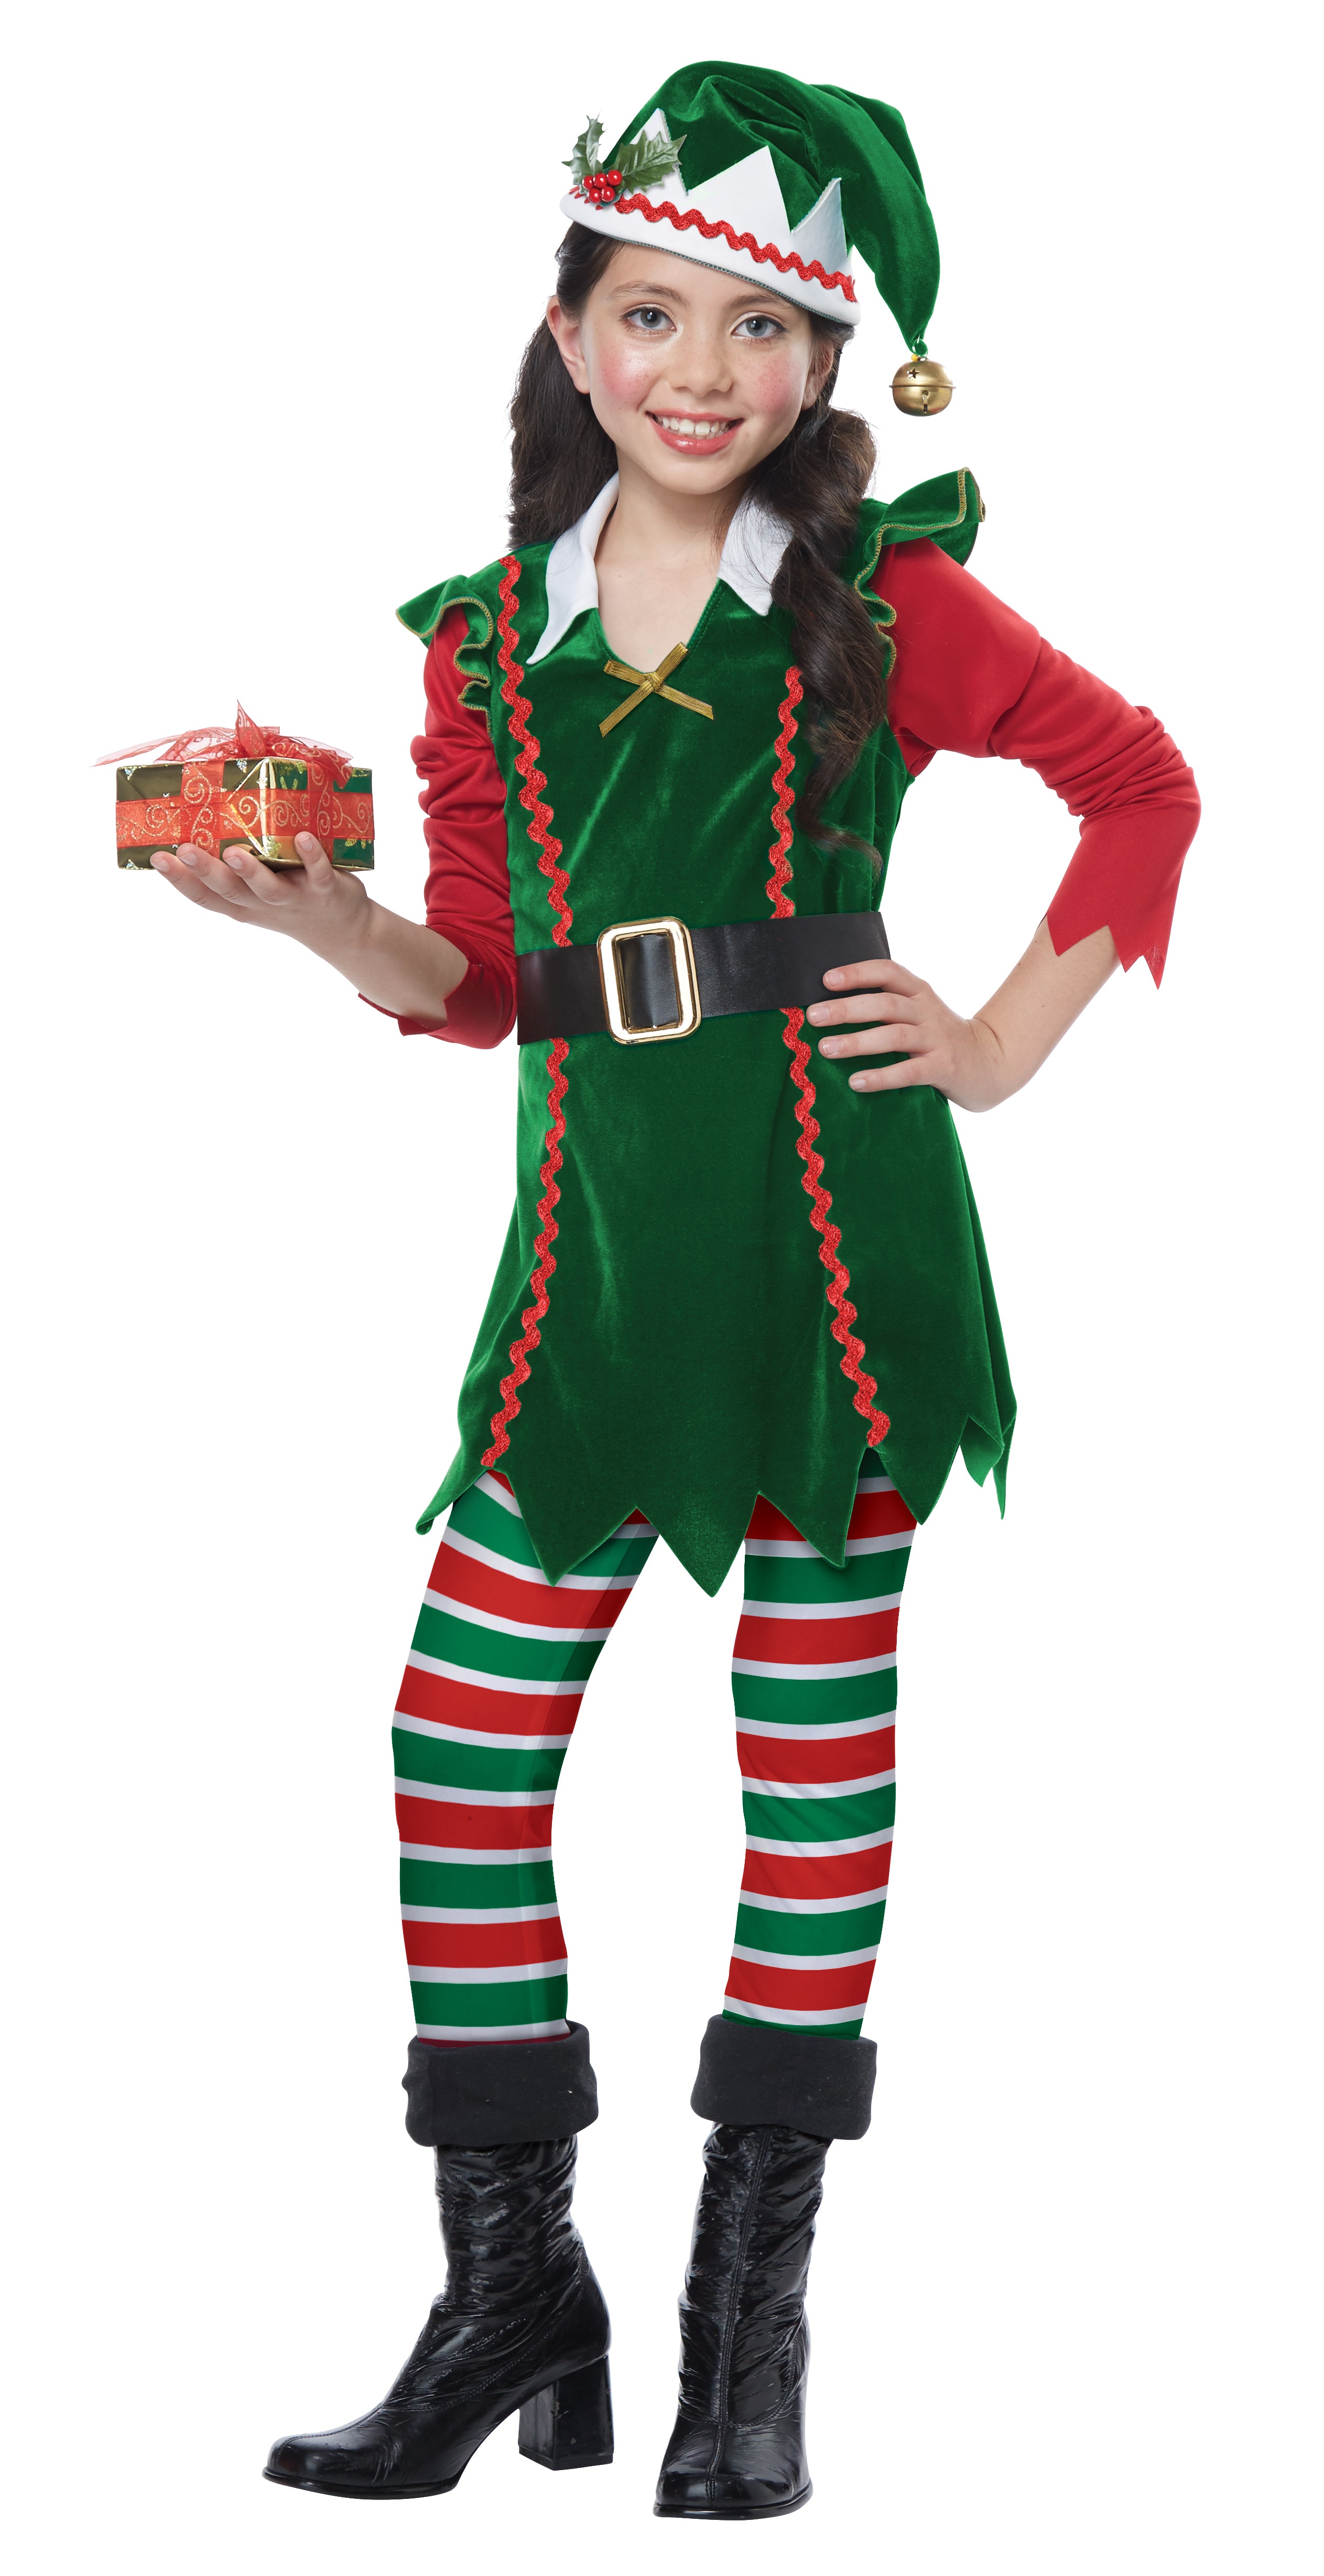 Christmas Costumes - Santa Suits, Elves and Mrs Claus – My Fancy Dress